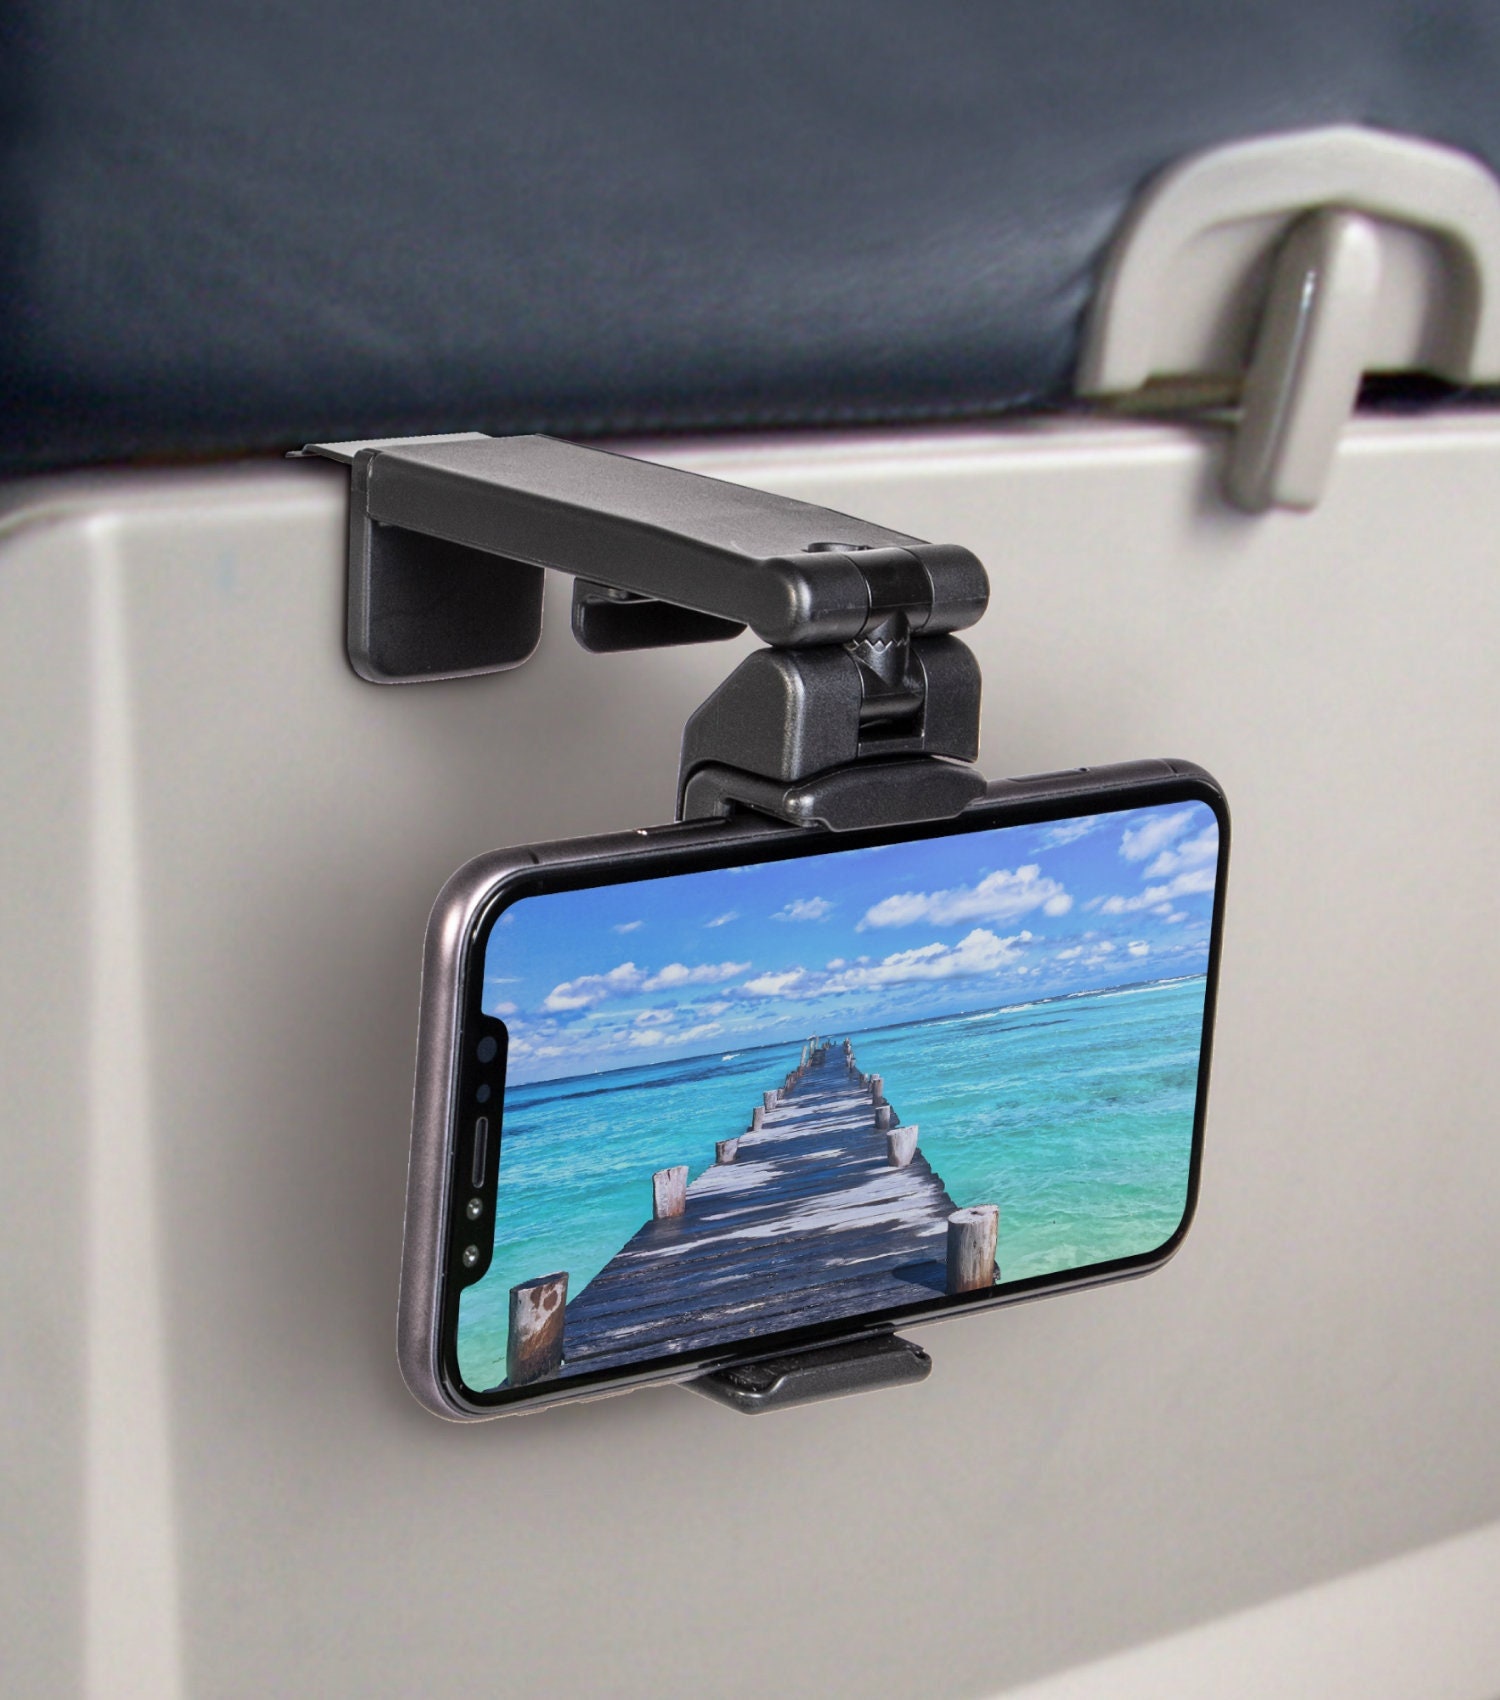  Travel Gadgets For Airplane Travel